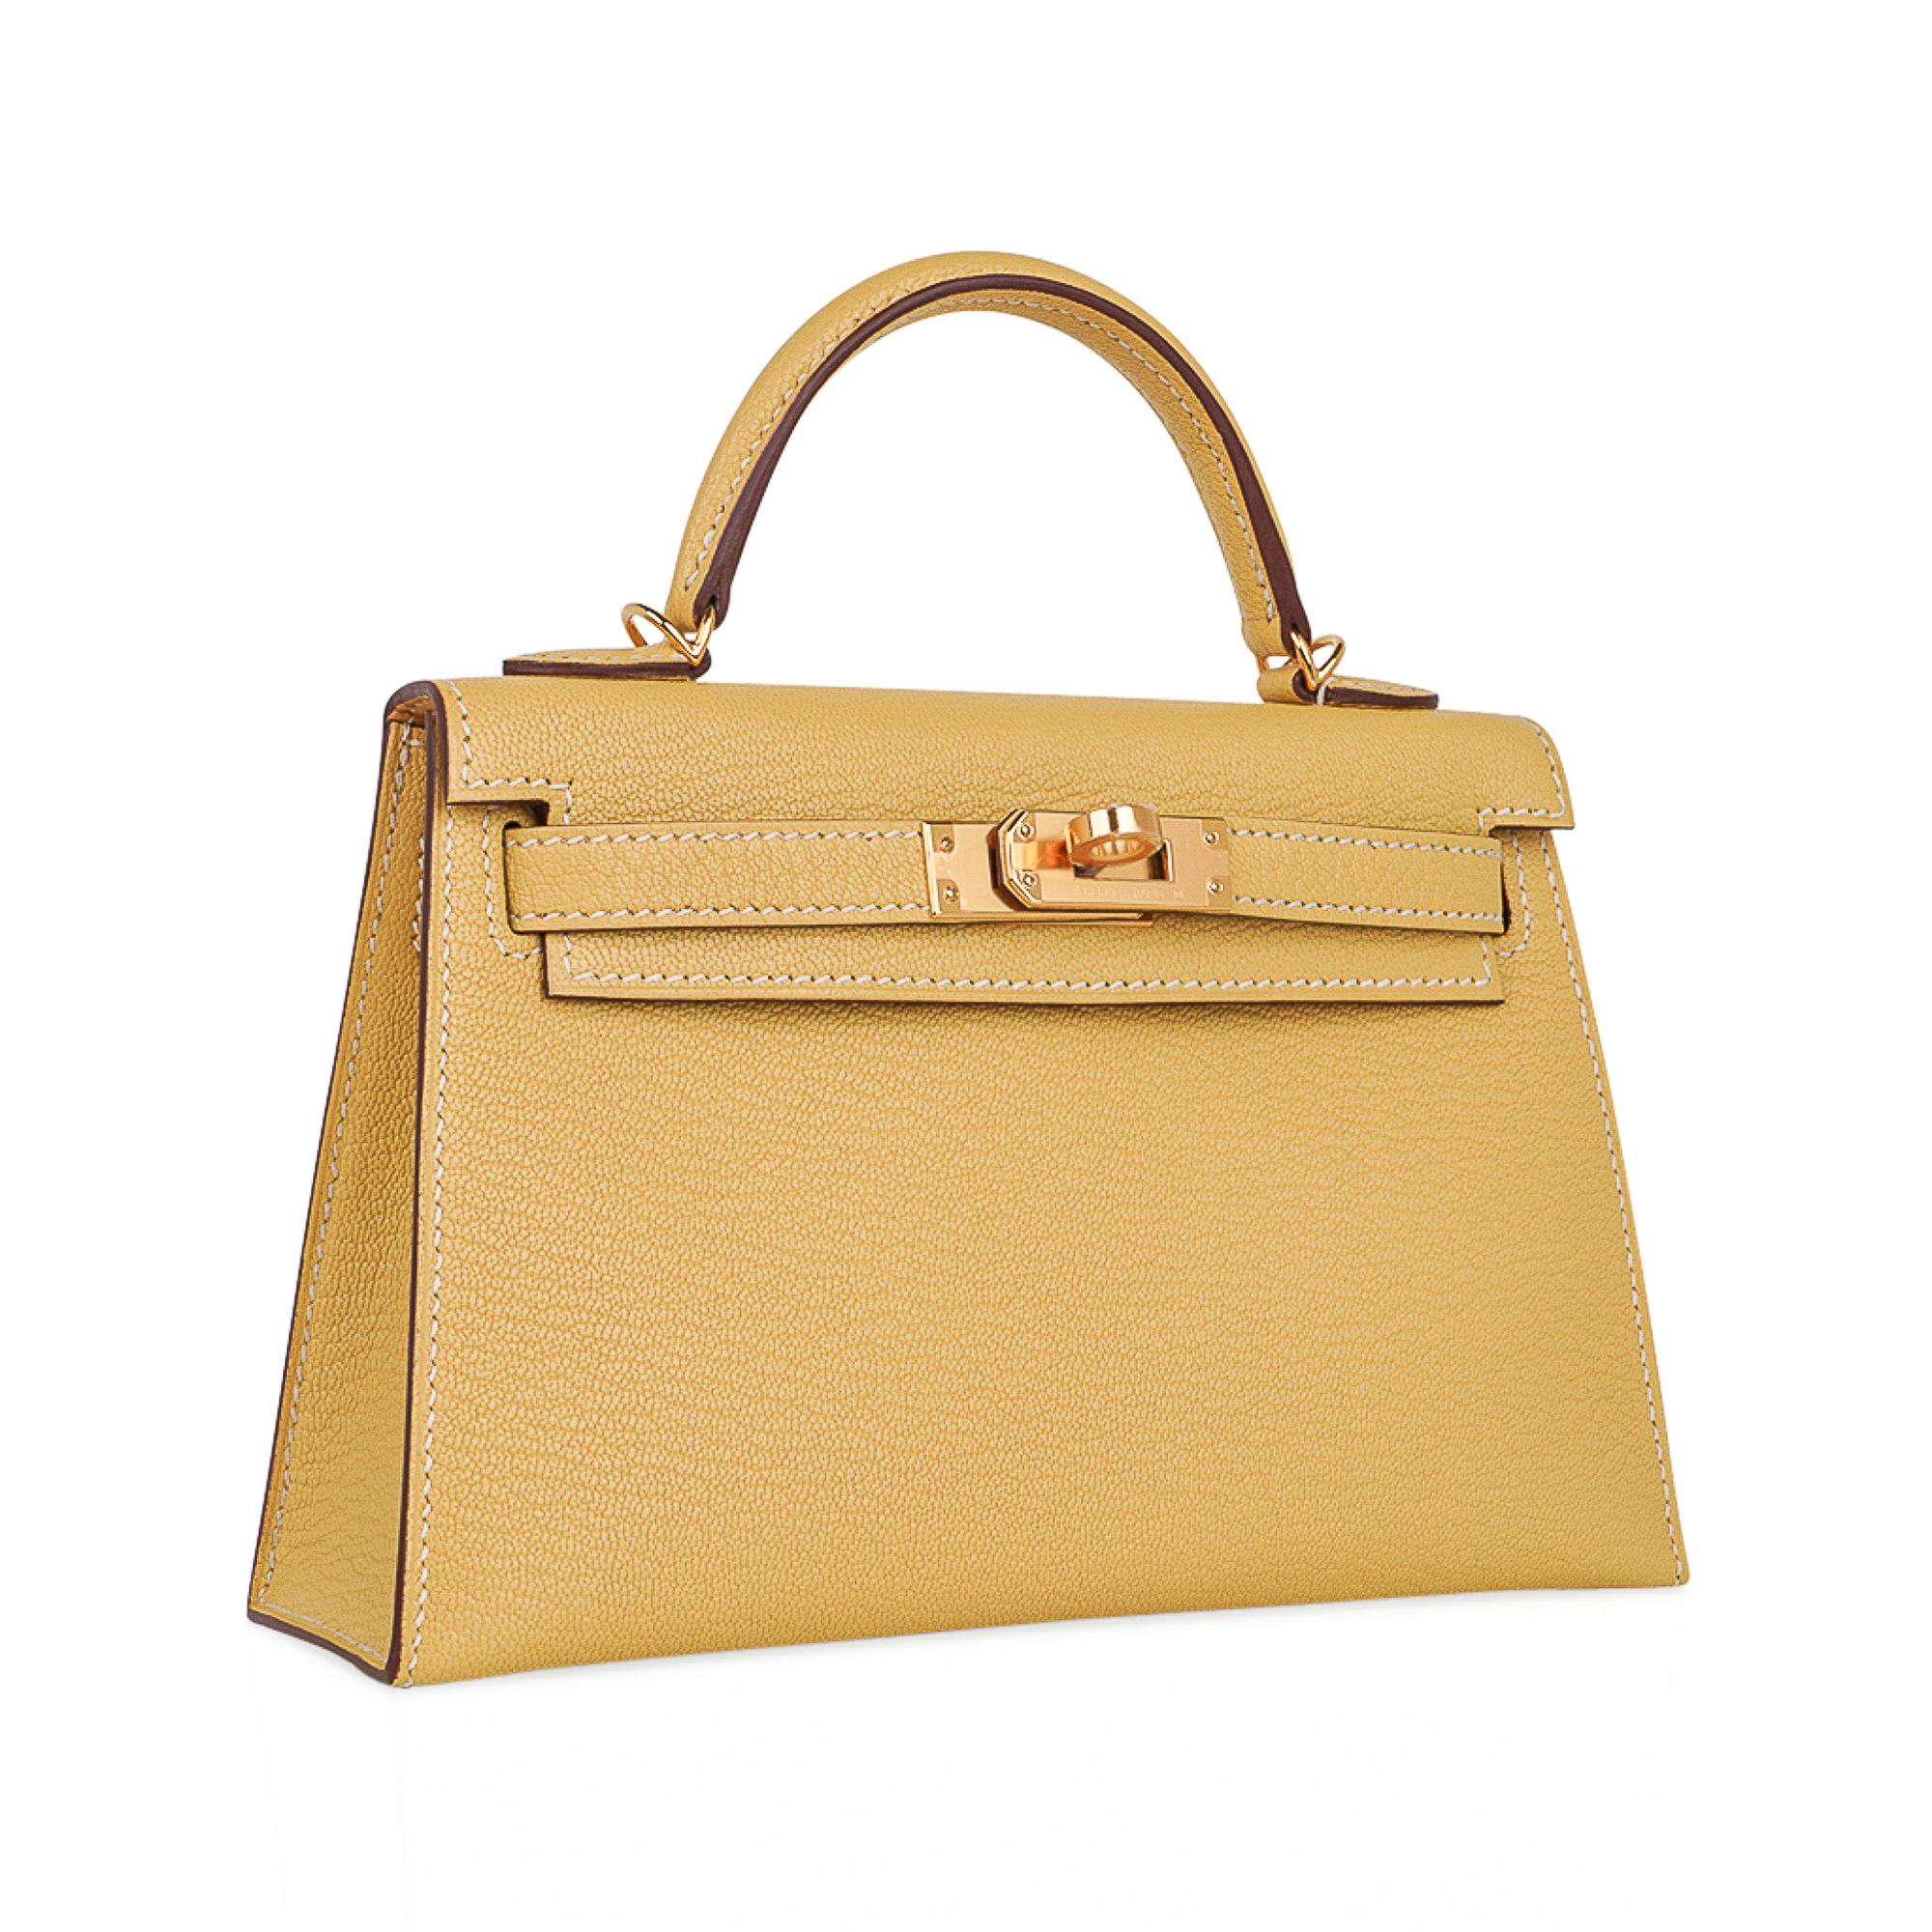 Mightychic offers an Hermes Kelly 20 Mini Sellier bag featured in rare Jaune Foin (Hay) yellow.  
Chevre leather accentuated with Gold hardware.
Comes with signature Hermes box, shoulder strap, and sleeper.
Please see our Kelly 20 Collection for an